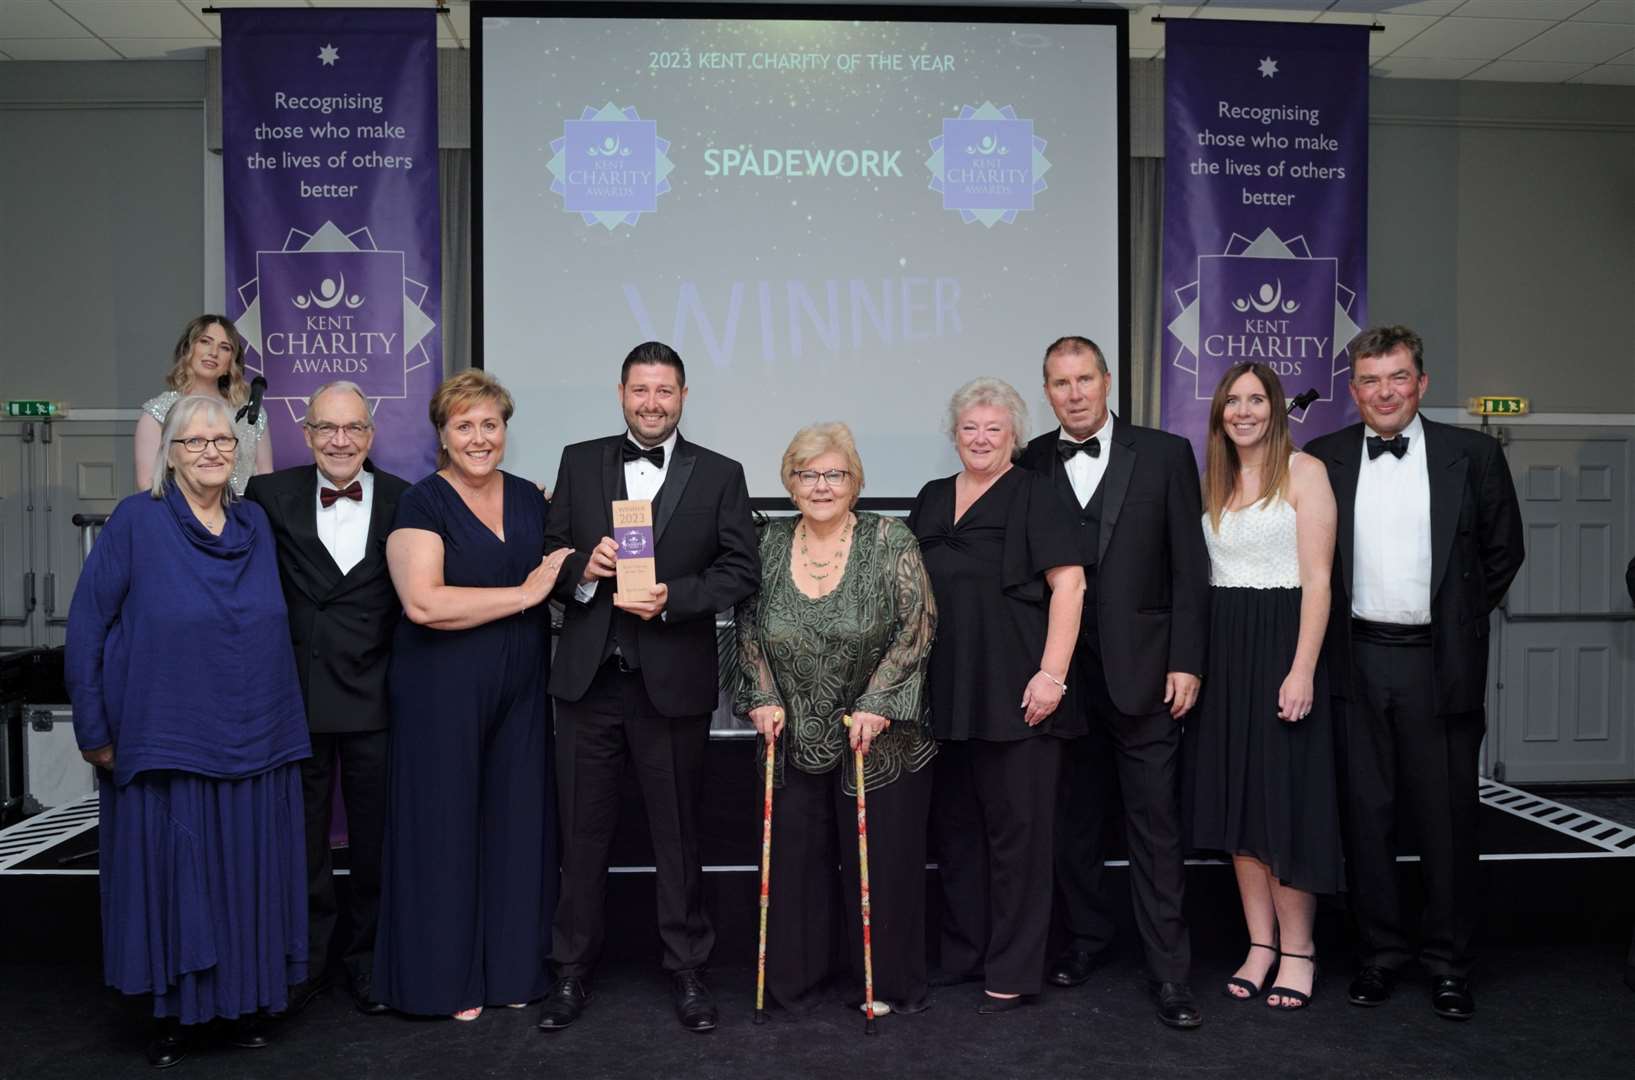 The organisation won Kent Charity of the Year at the 2023 awards. Picture: Simon Hildrew